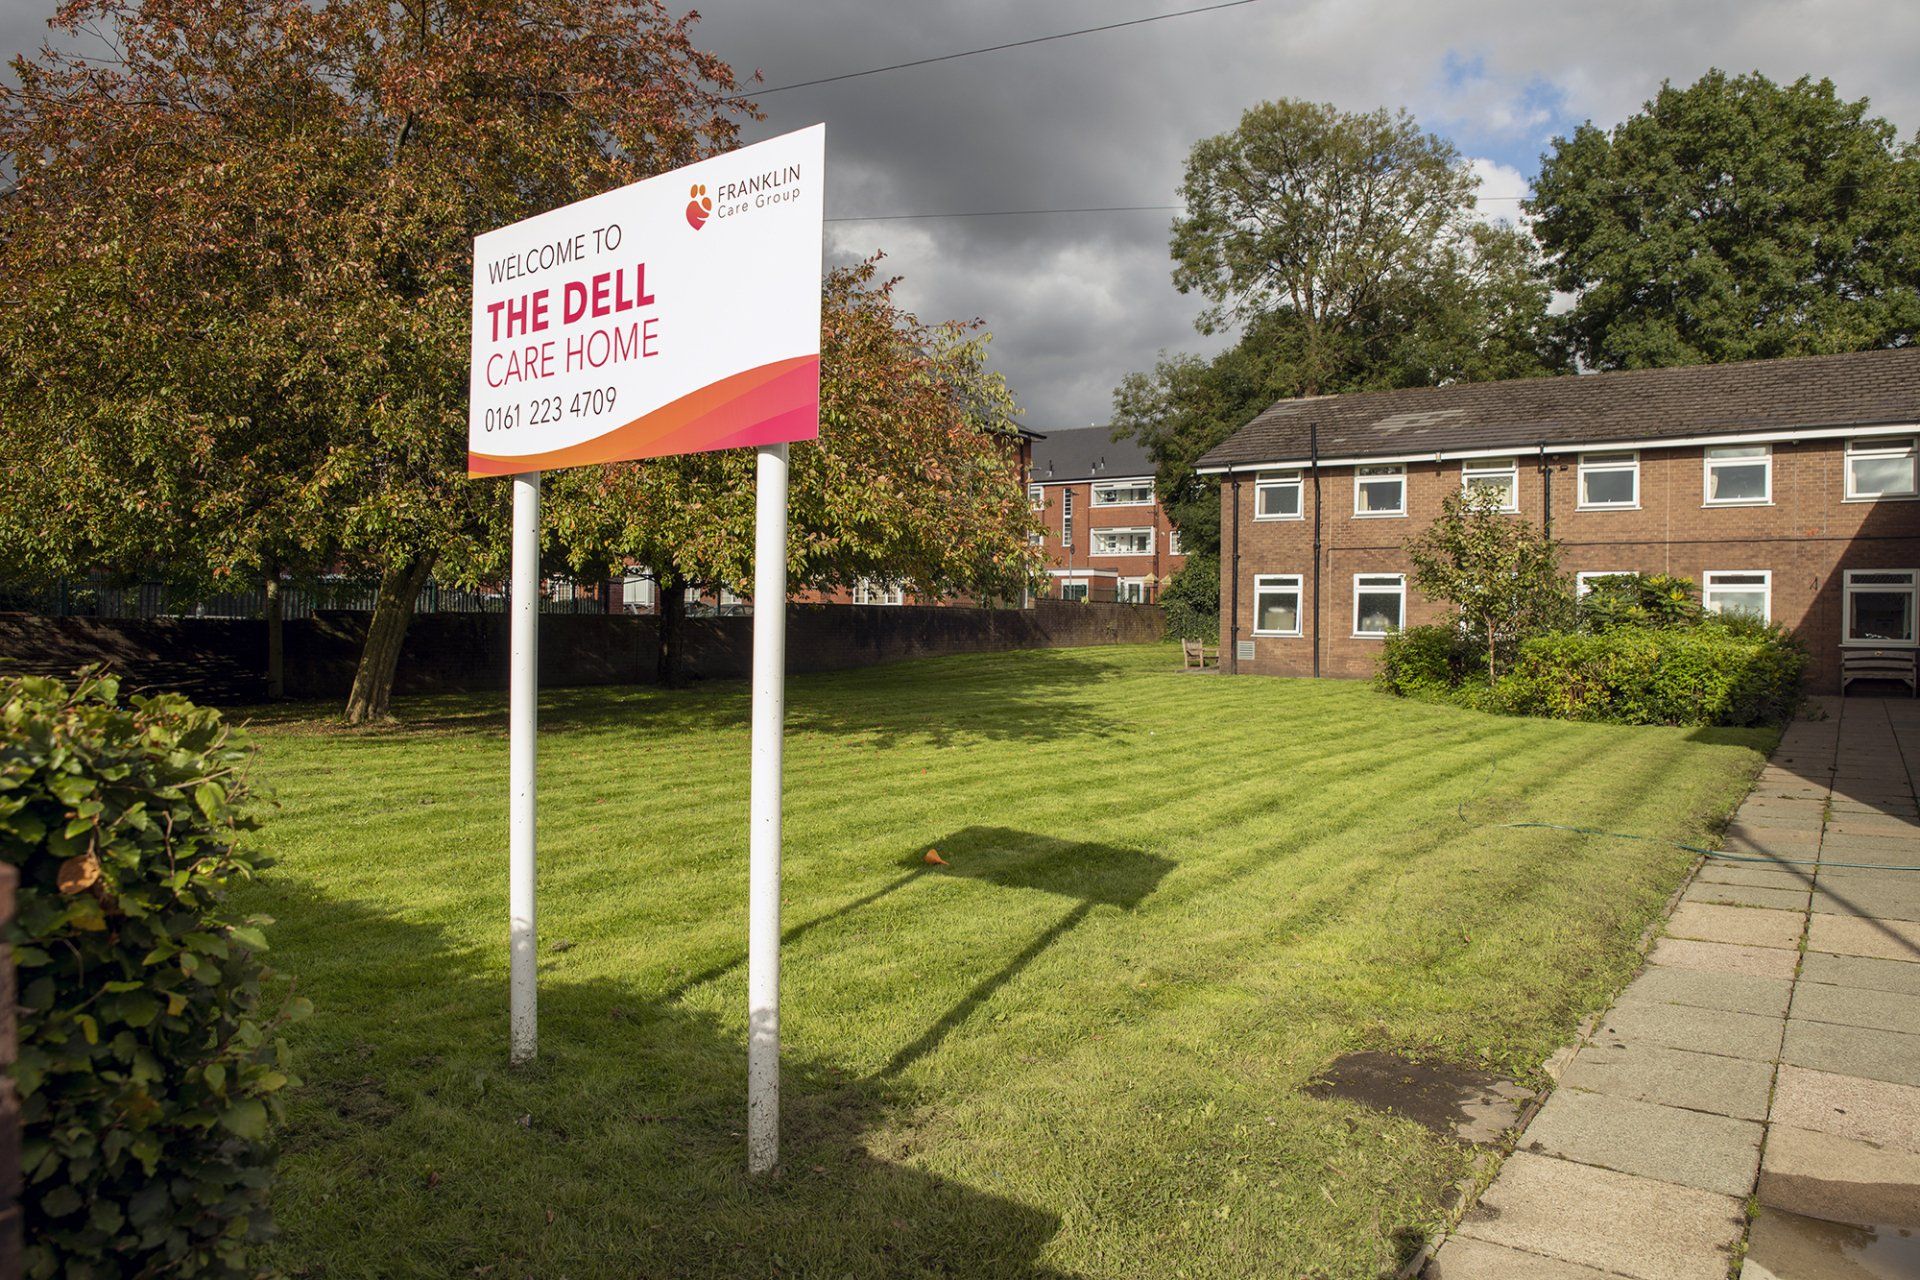 The team at The Dell Care Home were delighted to receive such an impressive CQC Report